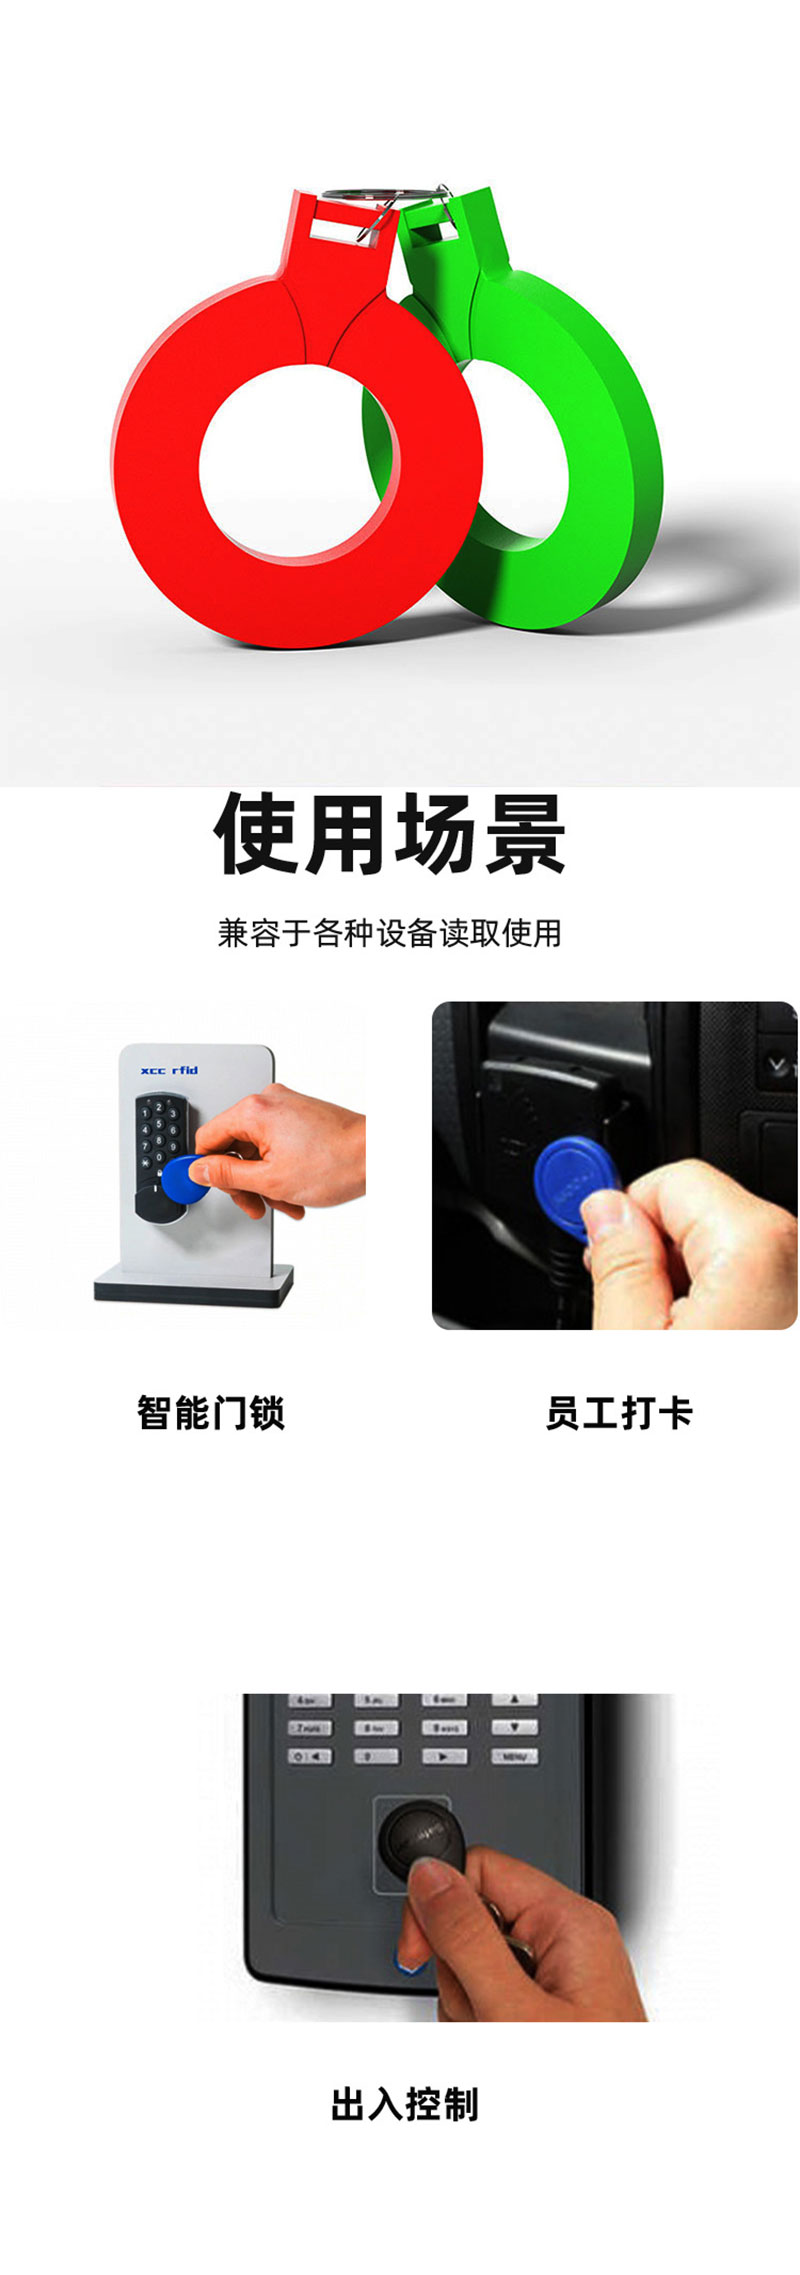 Factory customized IC access control card induction chip access control card smart ID community access control card leather key 4